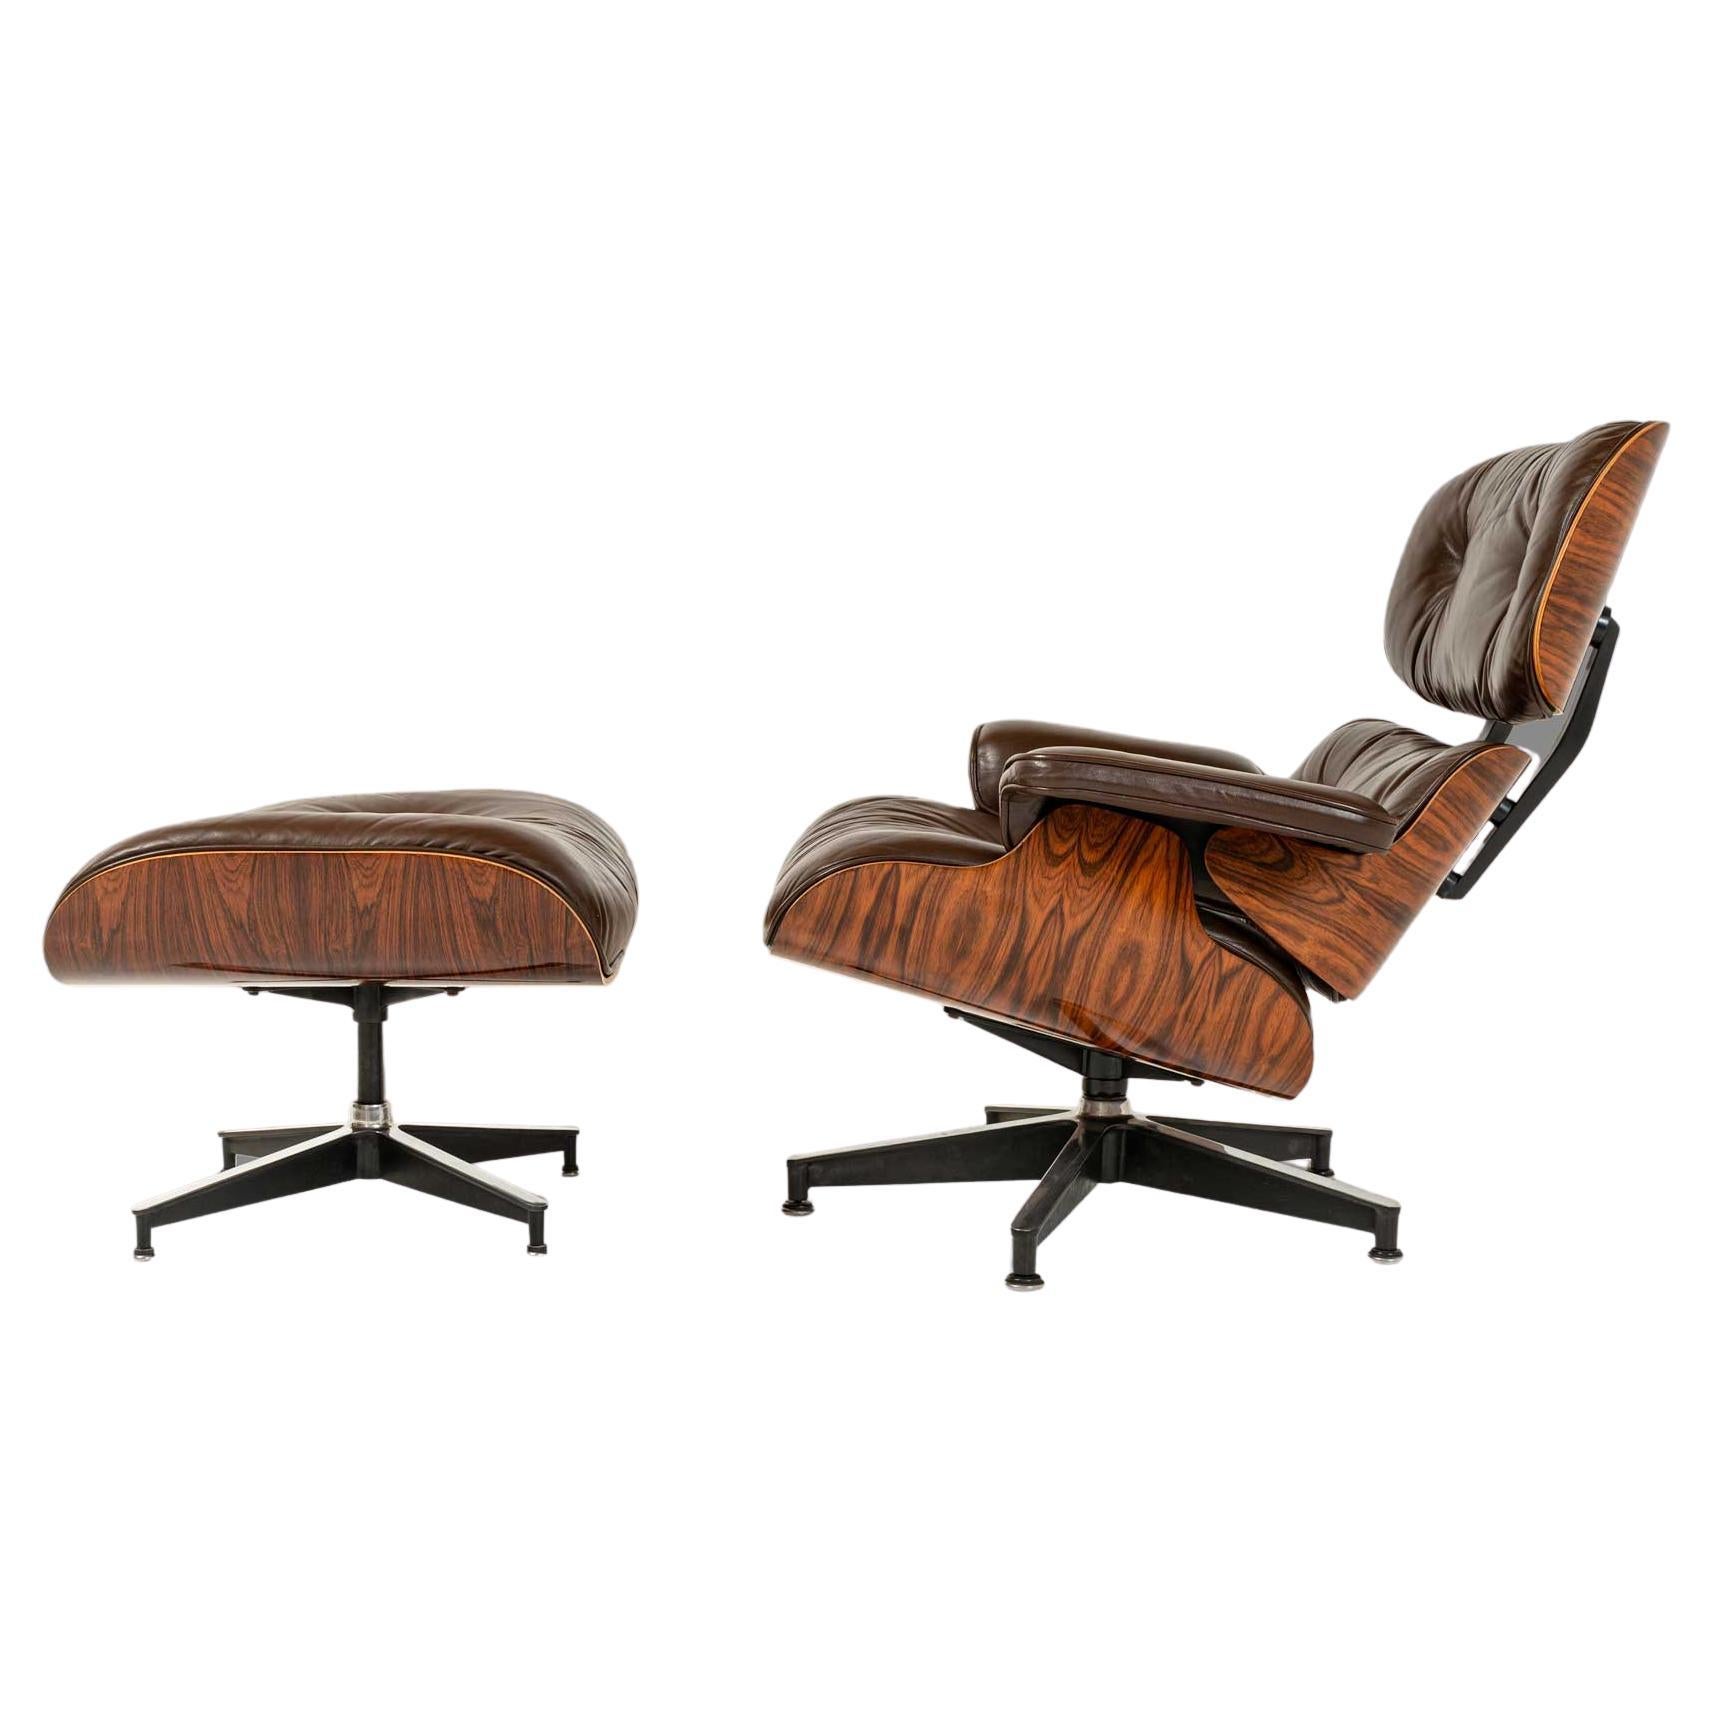 Restored 3rd Gen Eames Lounge Chair and Ottoman in Original Chocolate Leather